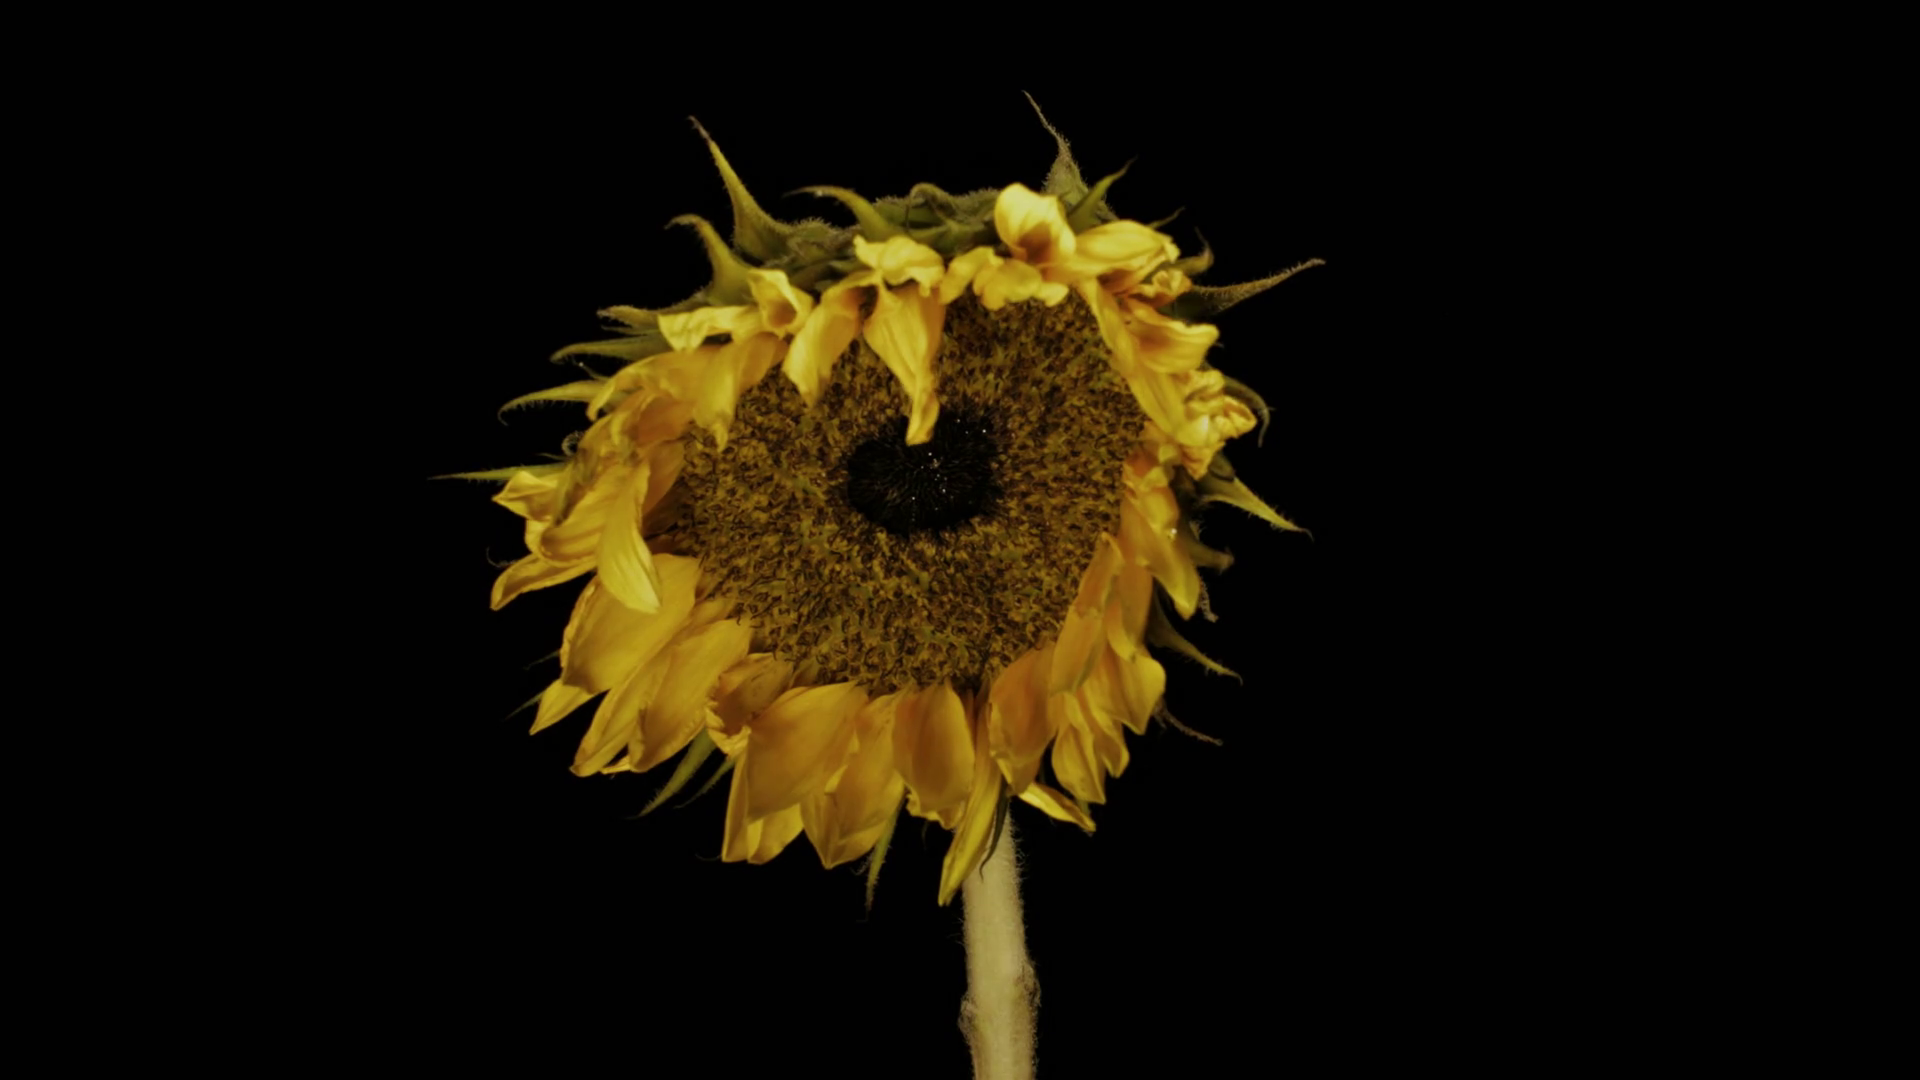 Medium static time lapse shot of a dying sunflower drying up against ...